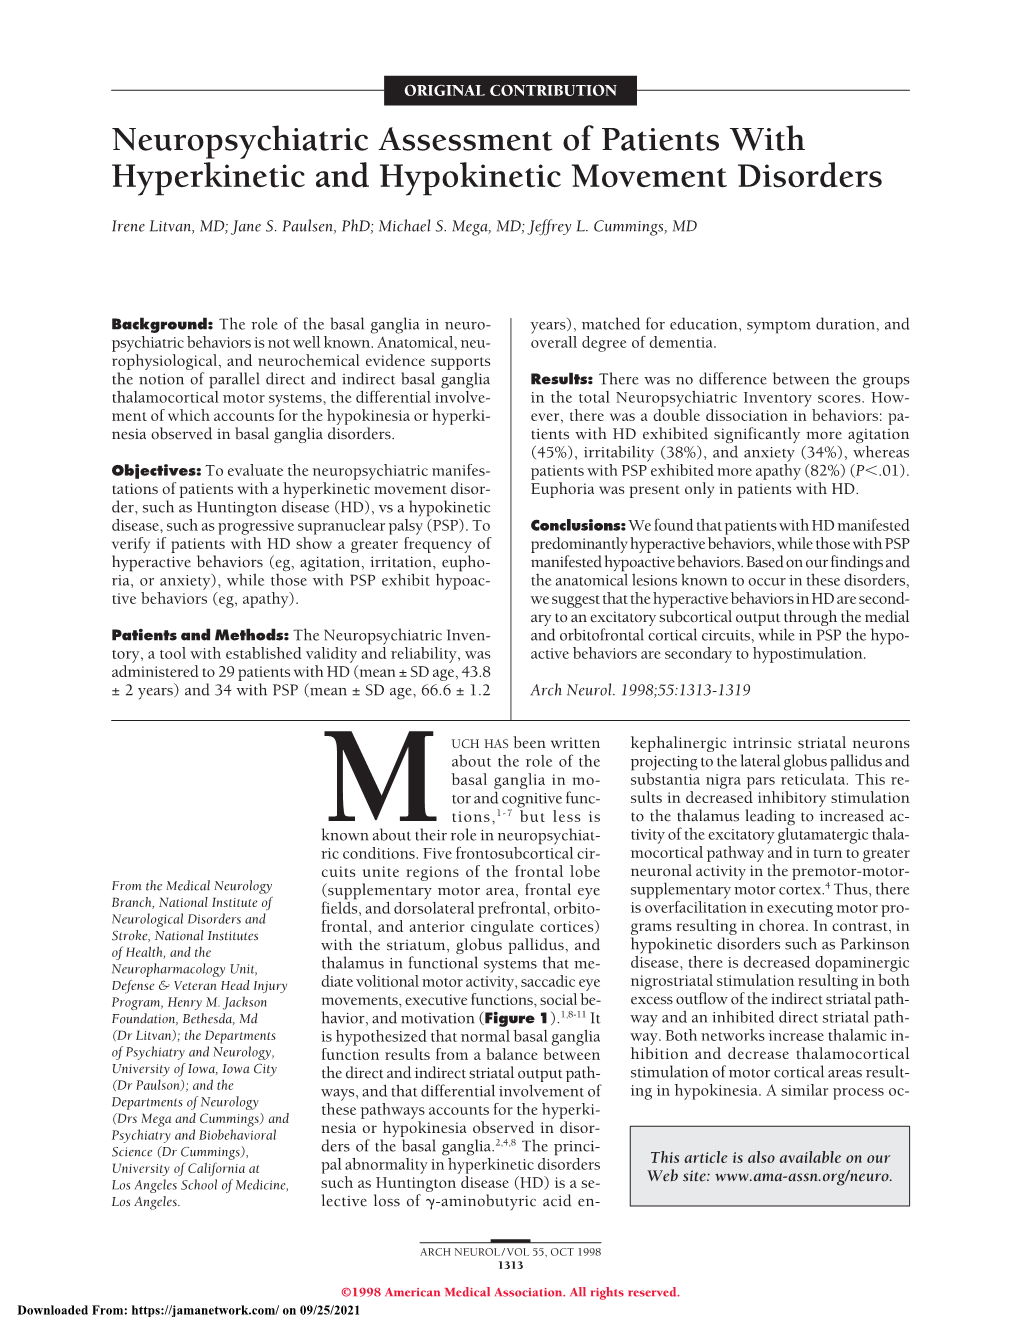 Neuropsychiatric Assessment of Patients with Hyperkinetic and Hypokinetic Movement Disorders